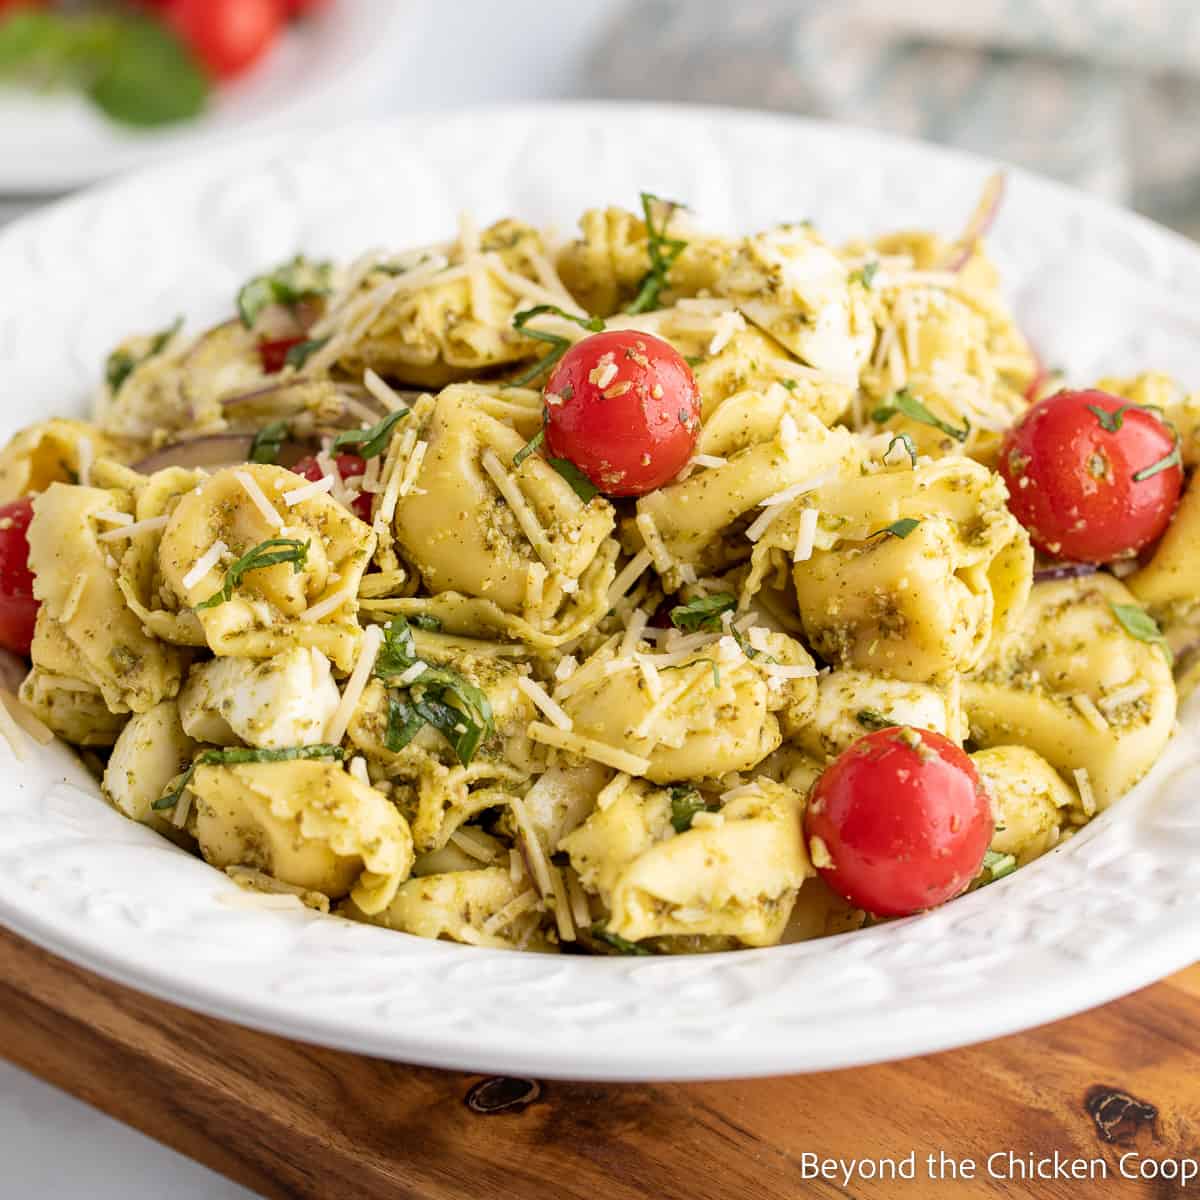 A pasta salad with tortellini and tomatoes in a white bowl.